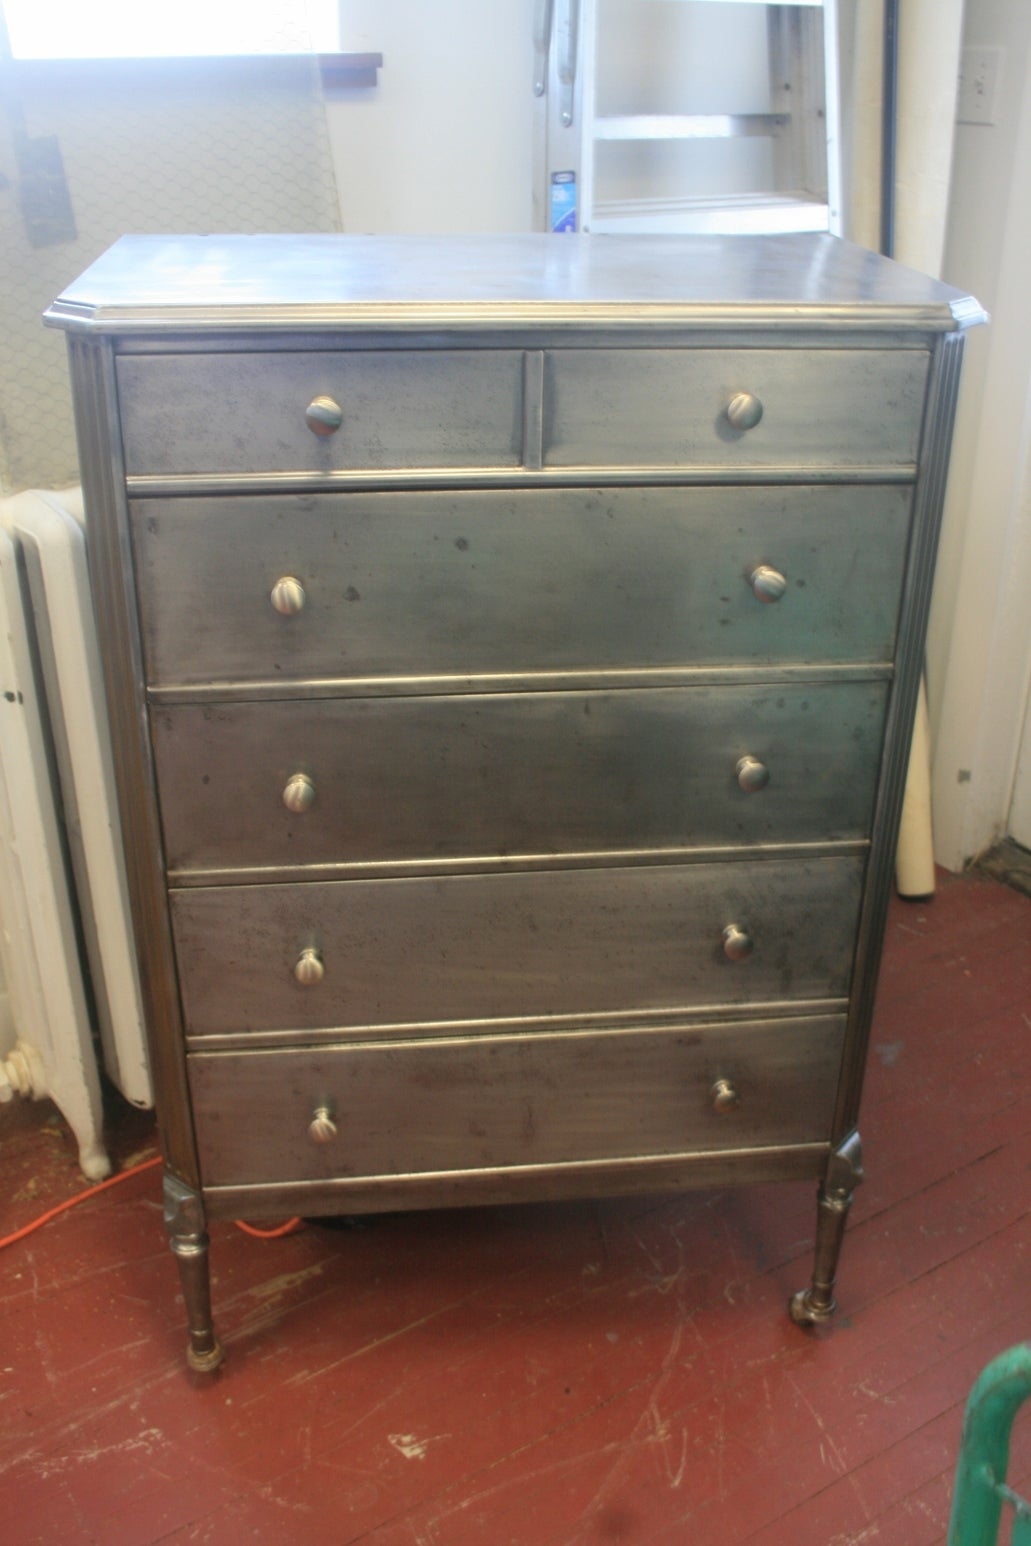 This beautiful Industrial look steel dresser made by the Simmons Co. circa 1930 is a match to the one I have on 1stdibs next to it, but was found with a little less rust that I had to remove..  This dresser like all of the Simmons steel furniture